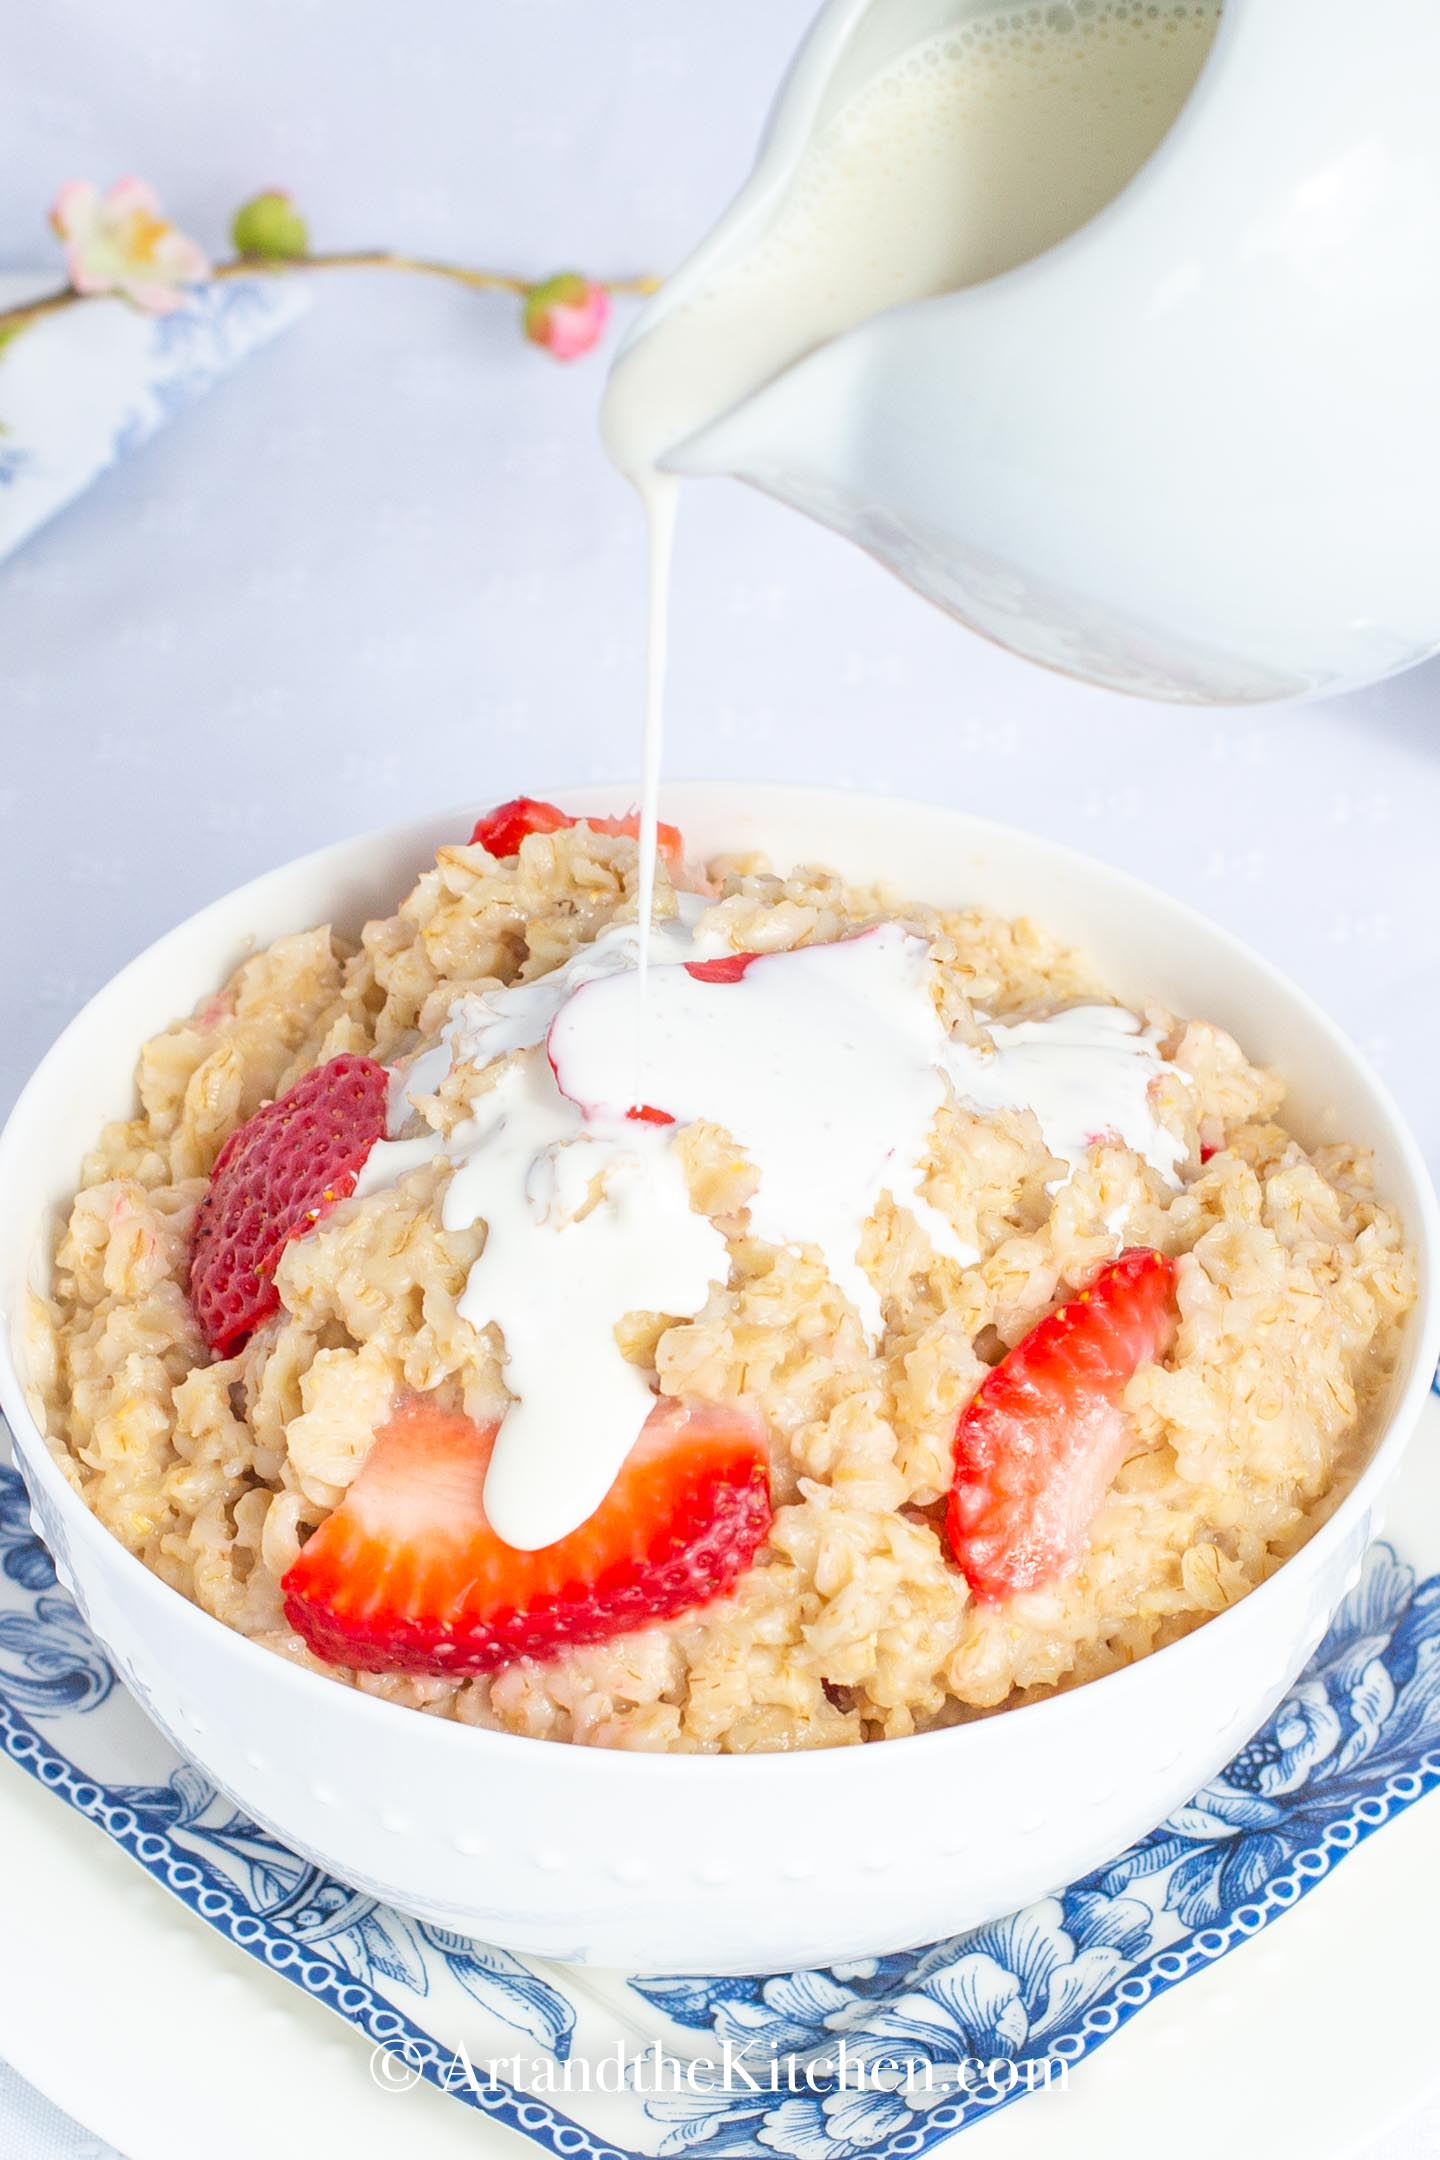 Cream pouring over bowl of oatmeal with strawberries.